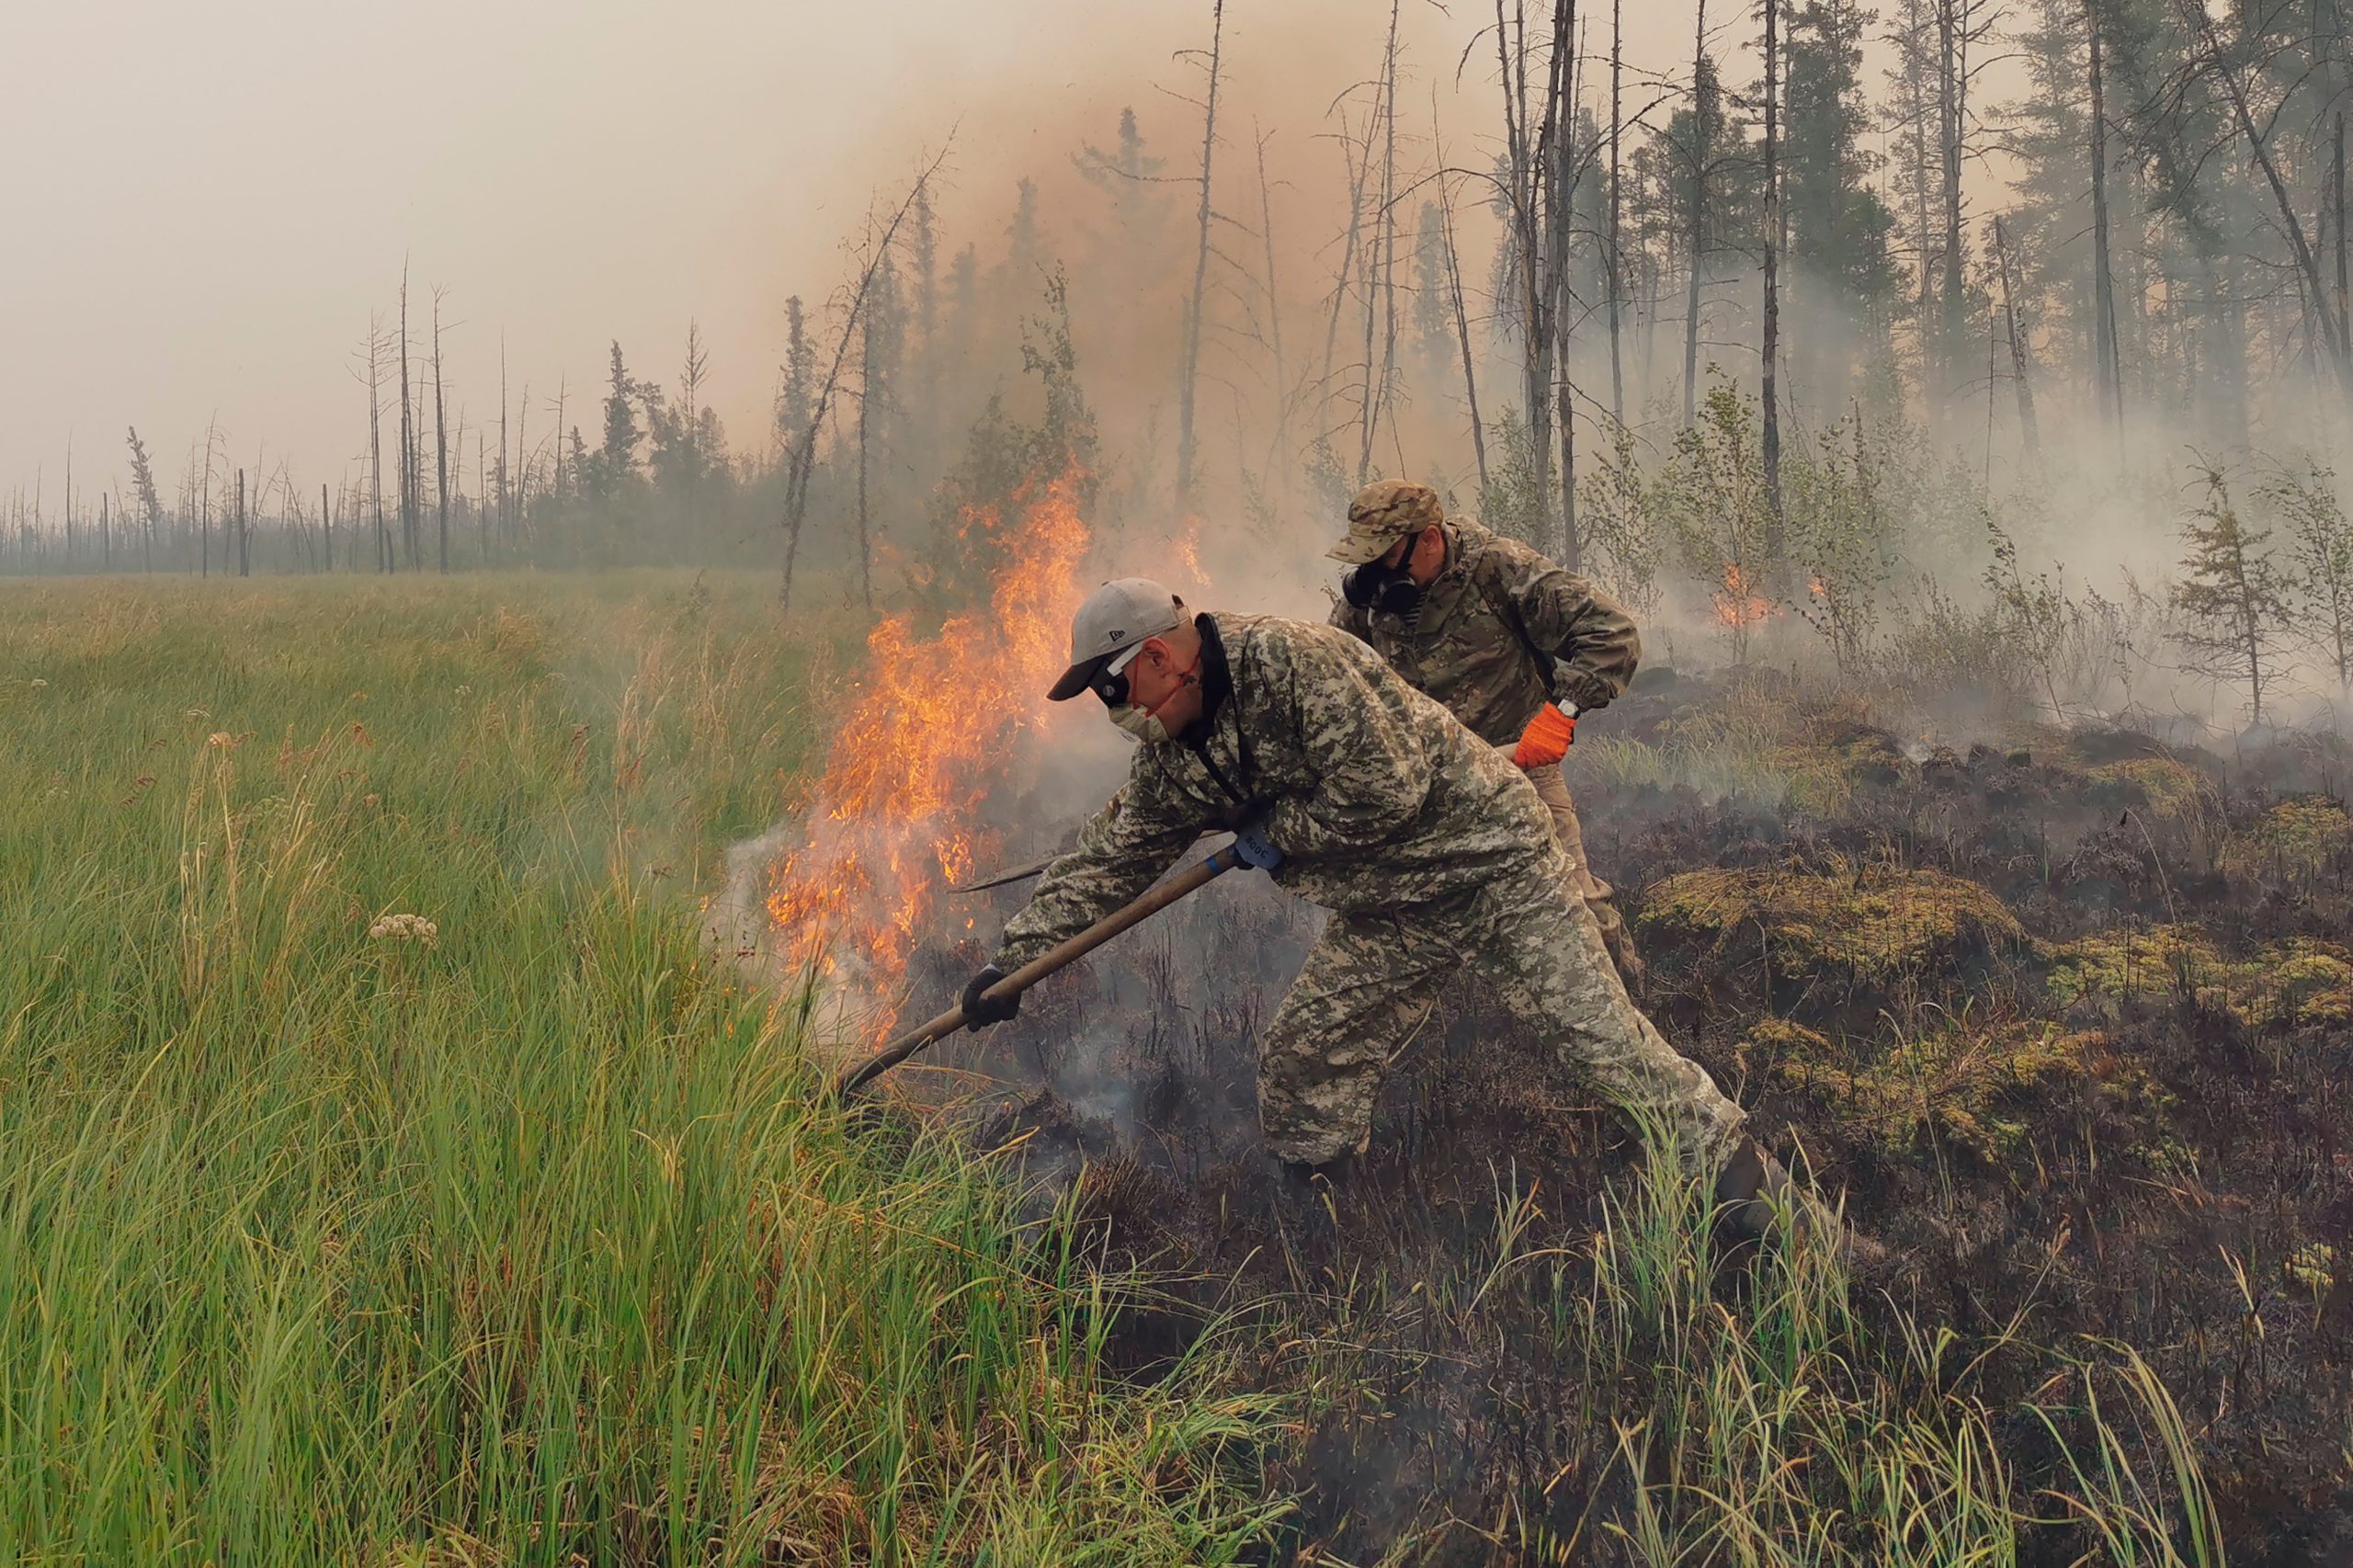 Volunteers douse a forest fire in the republic of Sakha also known as Yakutia, Russia Far East, Saturday, July 17, 2021. (Photo: Ivan Nikiforov, AP)